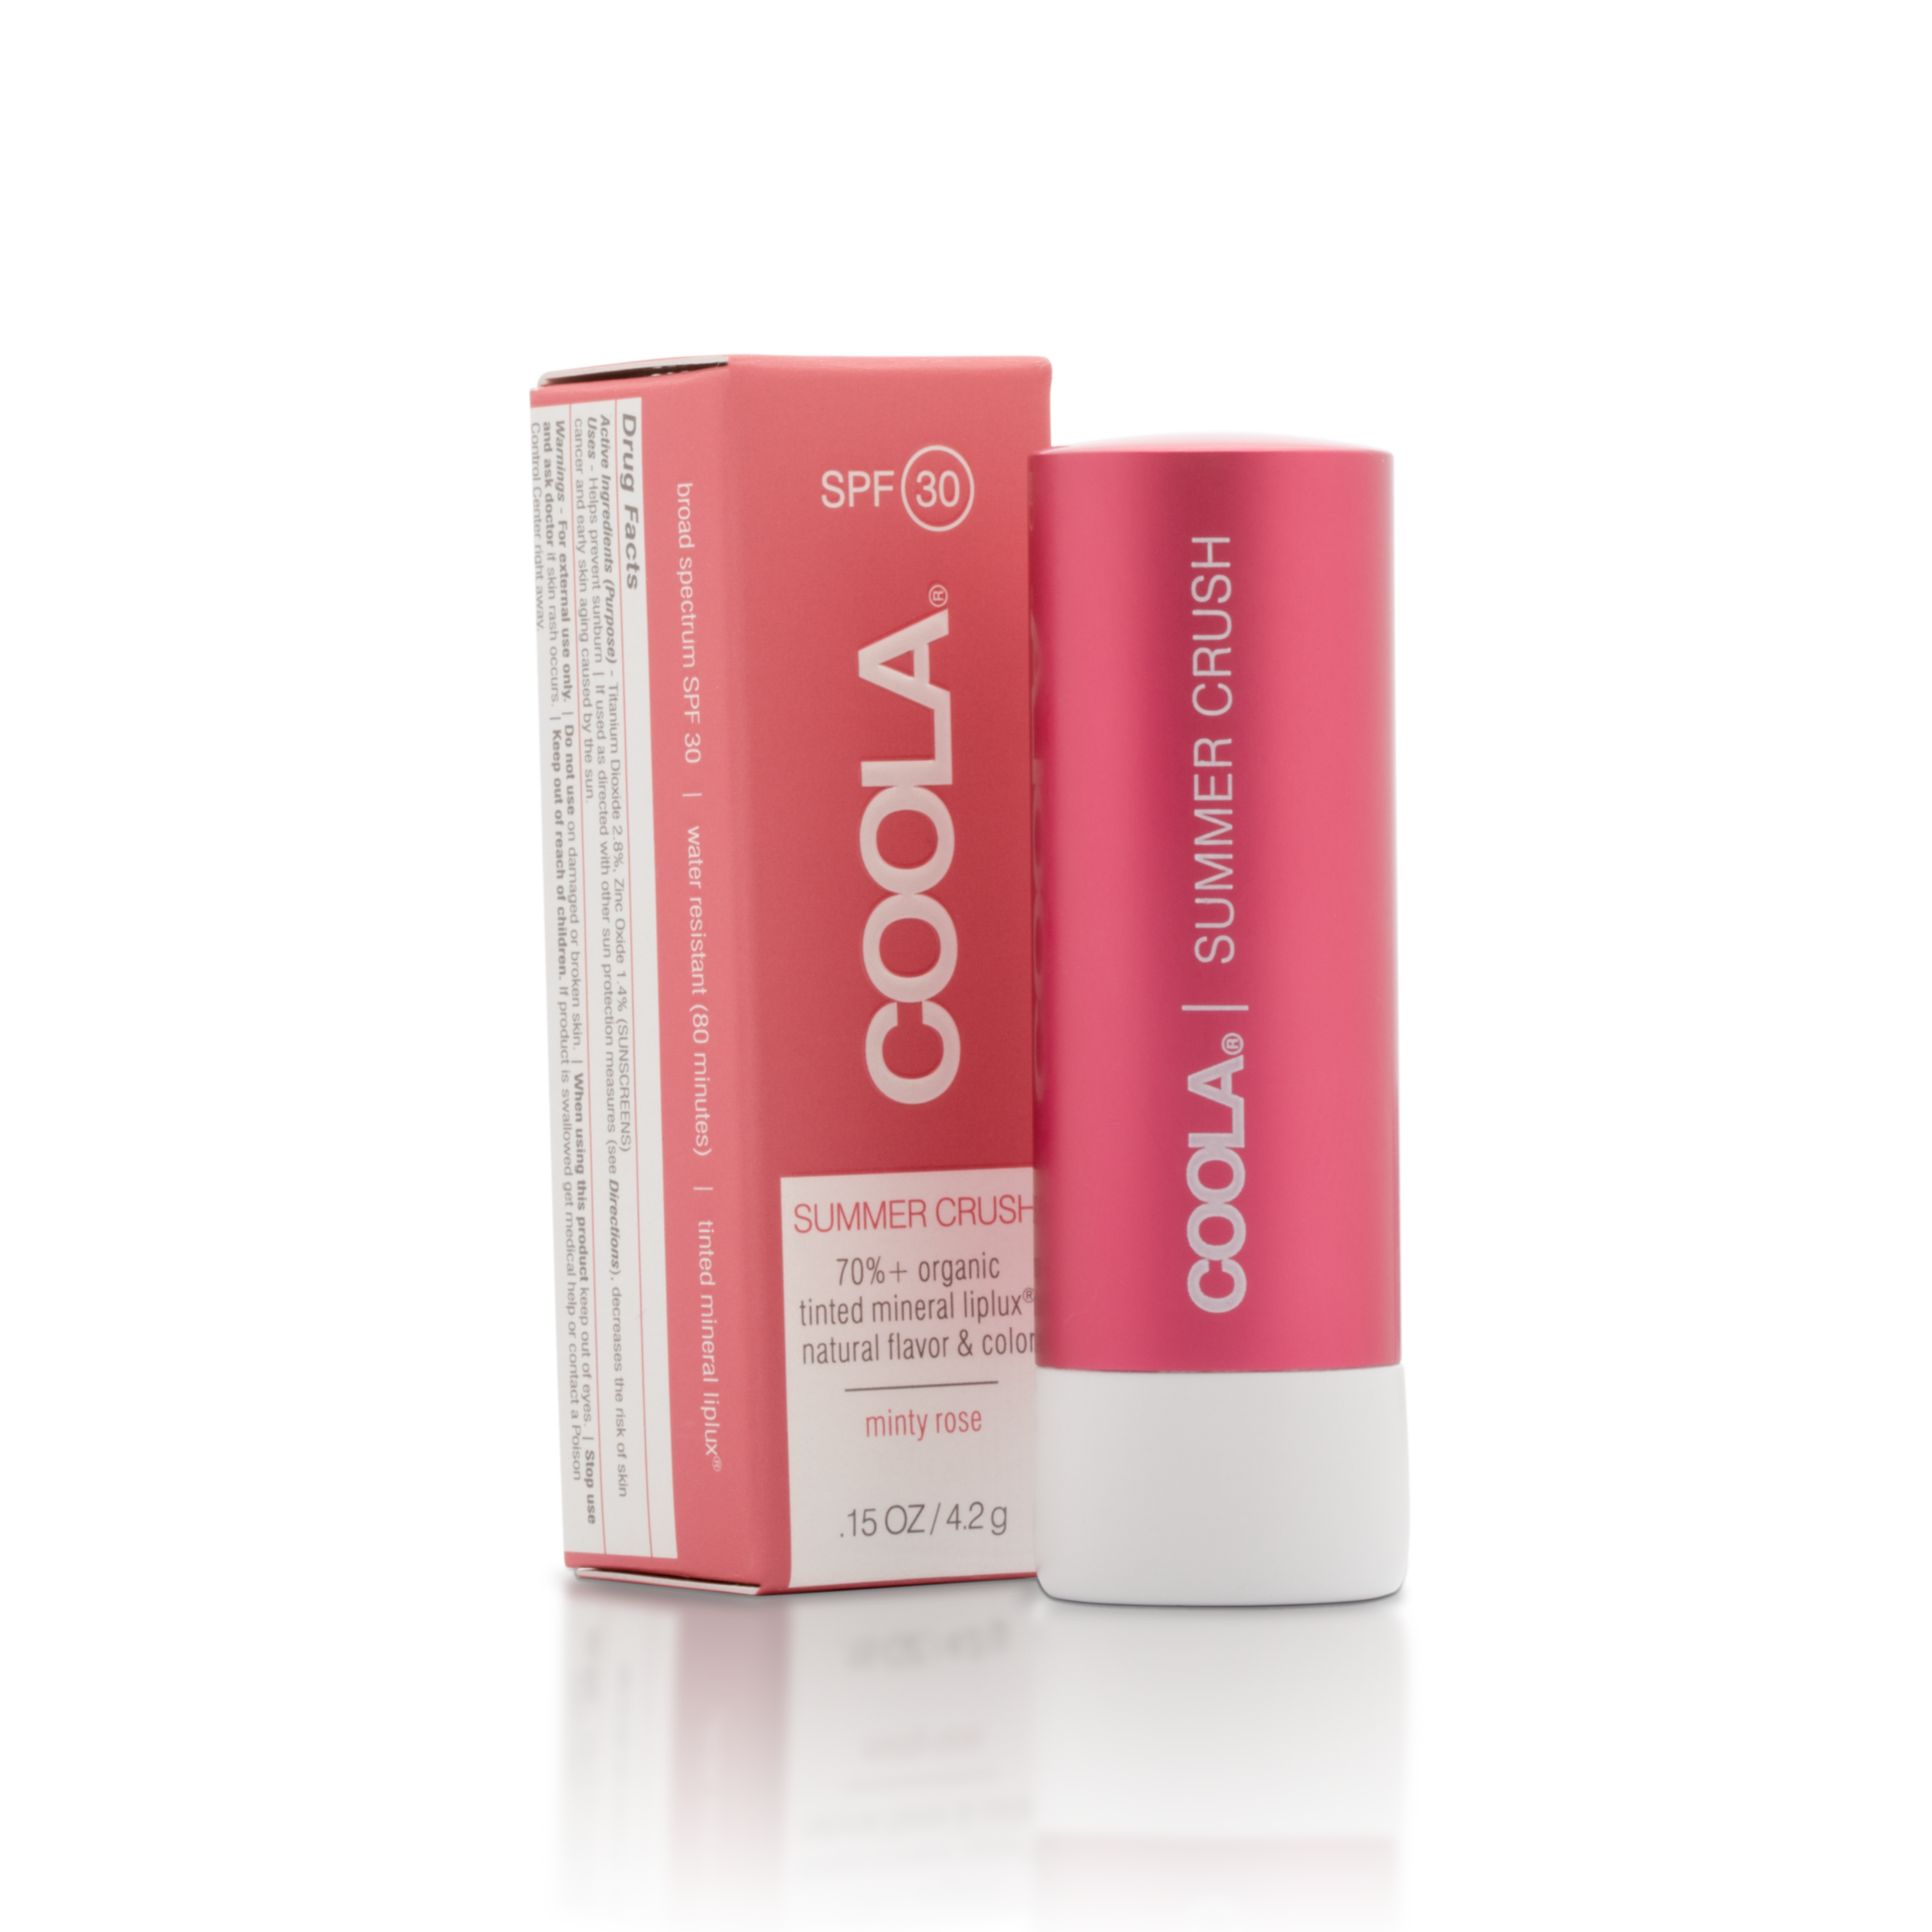 COOLA Mineral Liplux Tinted Lip Balm Sunscreen SPF 30